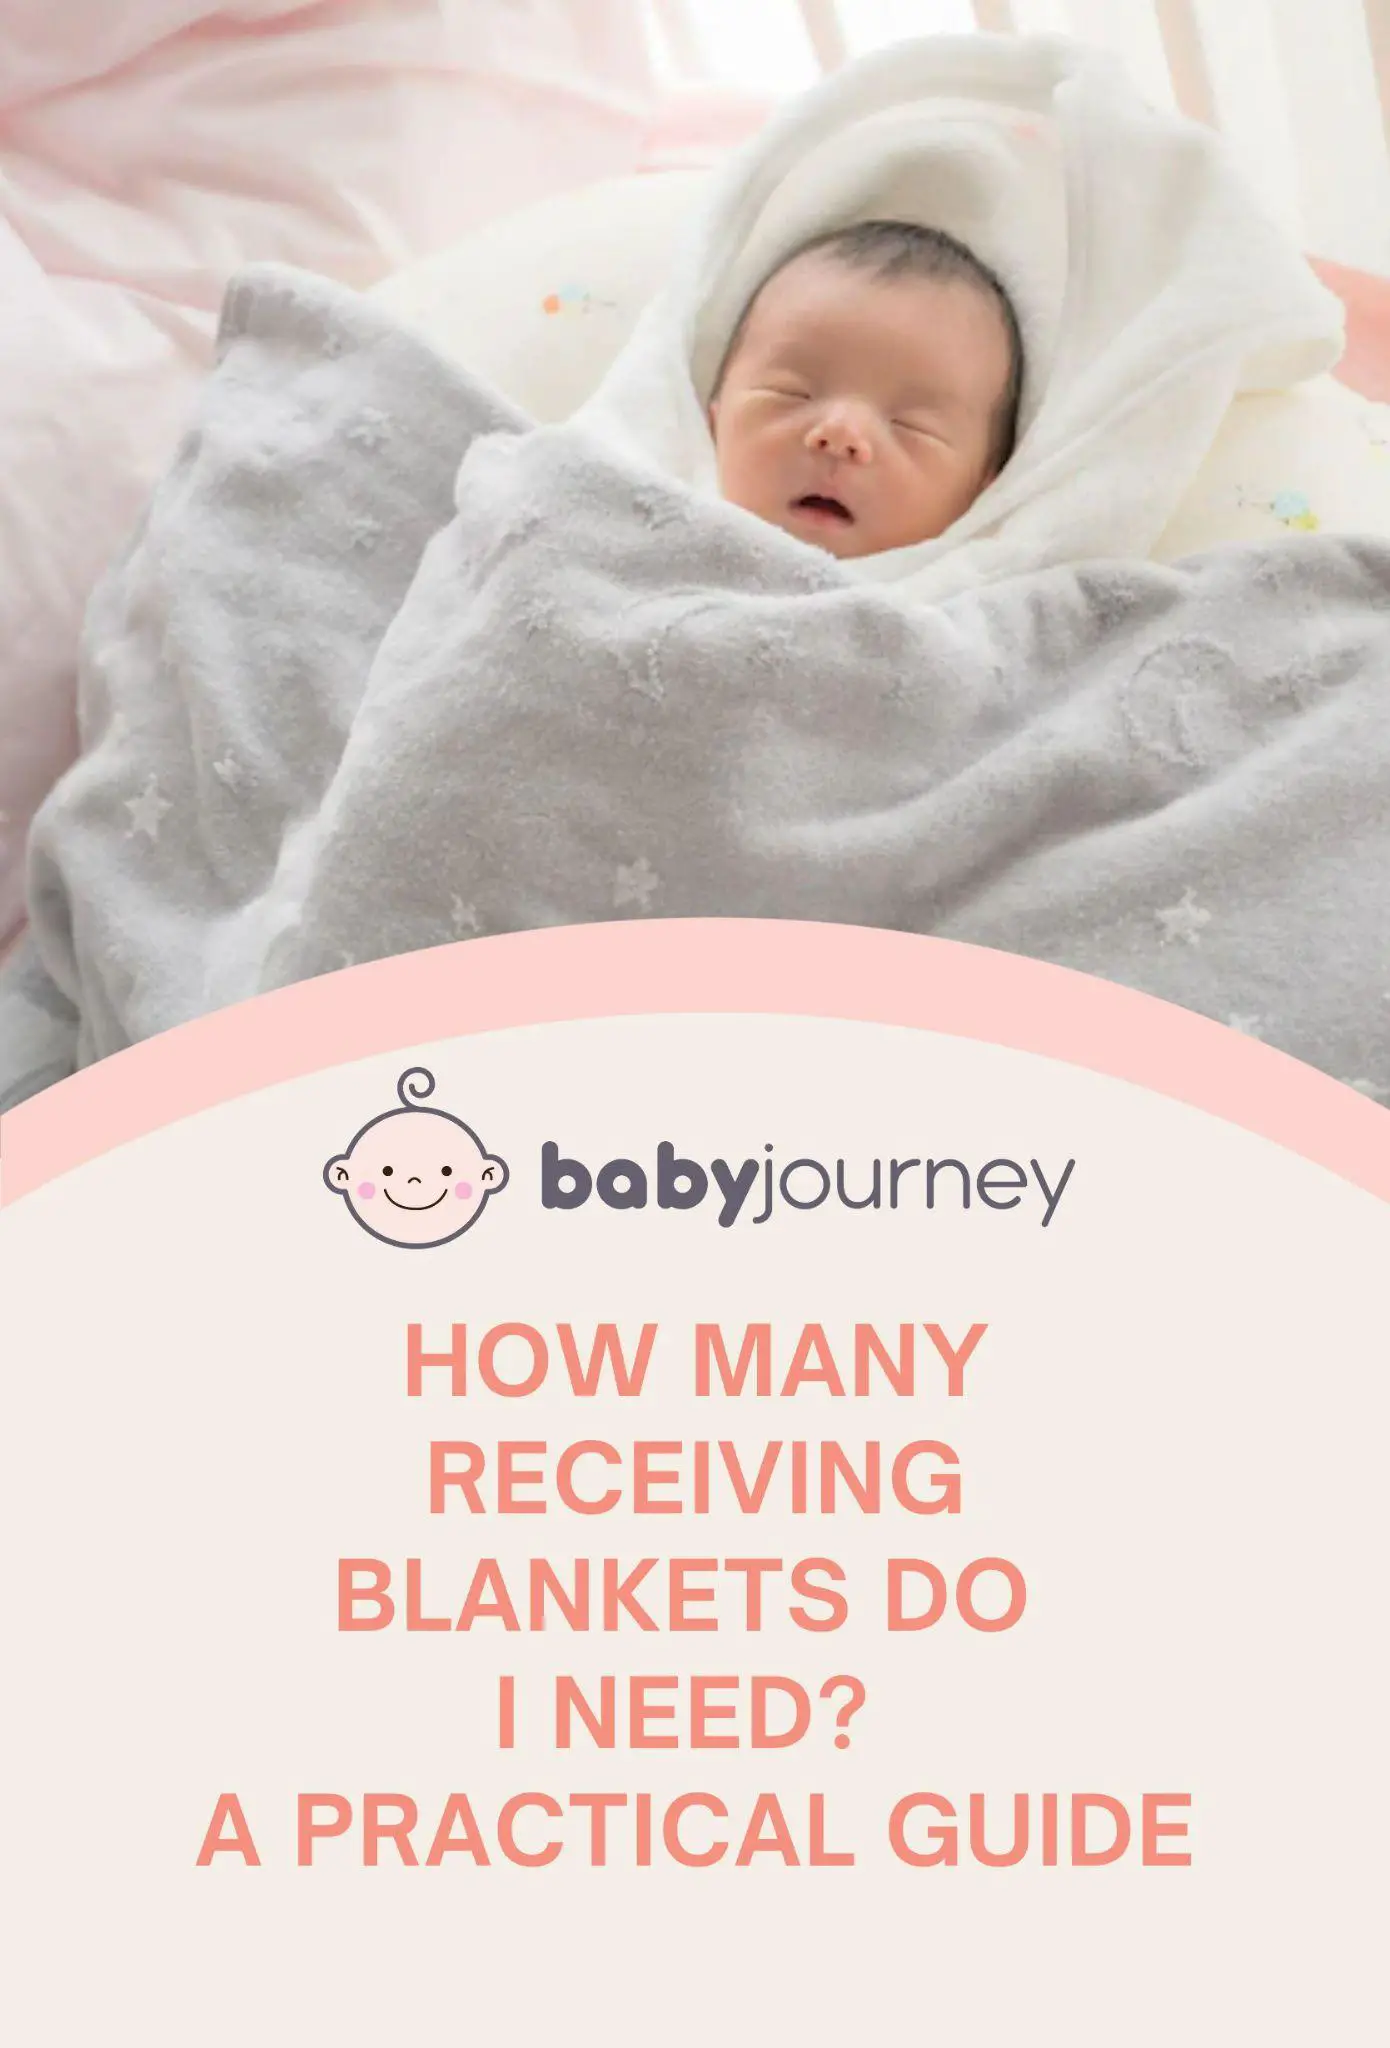 How Many Receiving Blankets Do I Need? A Practical Guide Pinterest Image - Baby Journey 